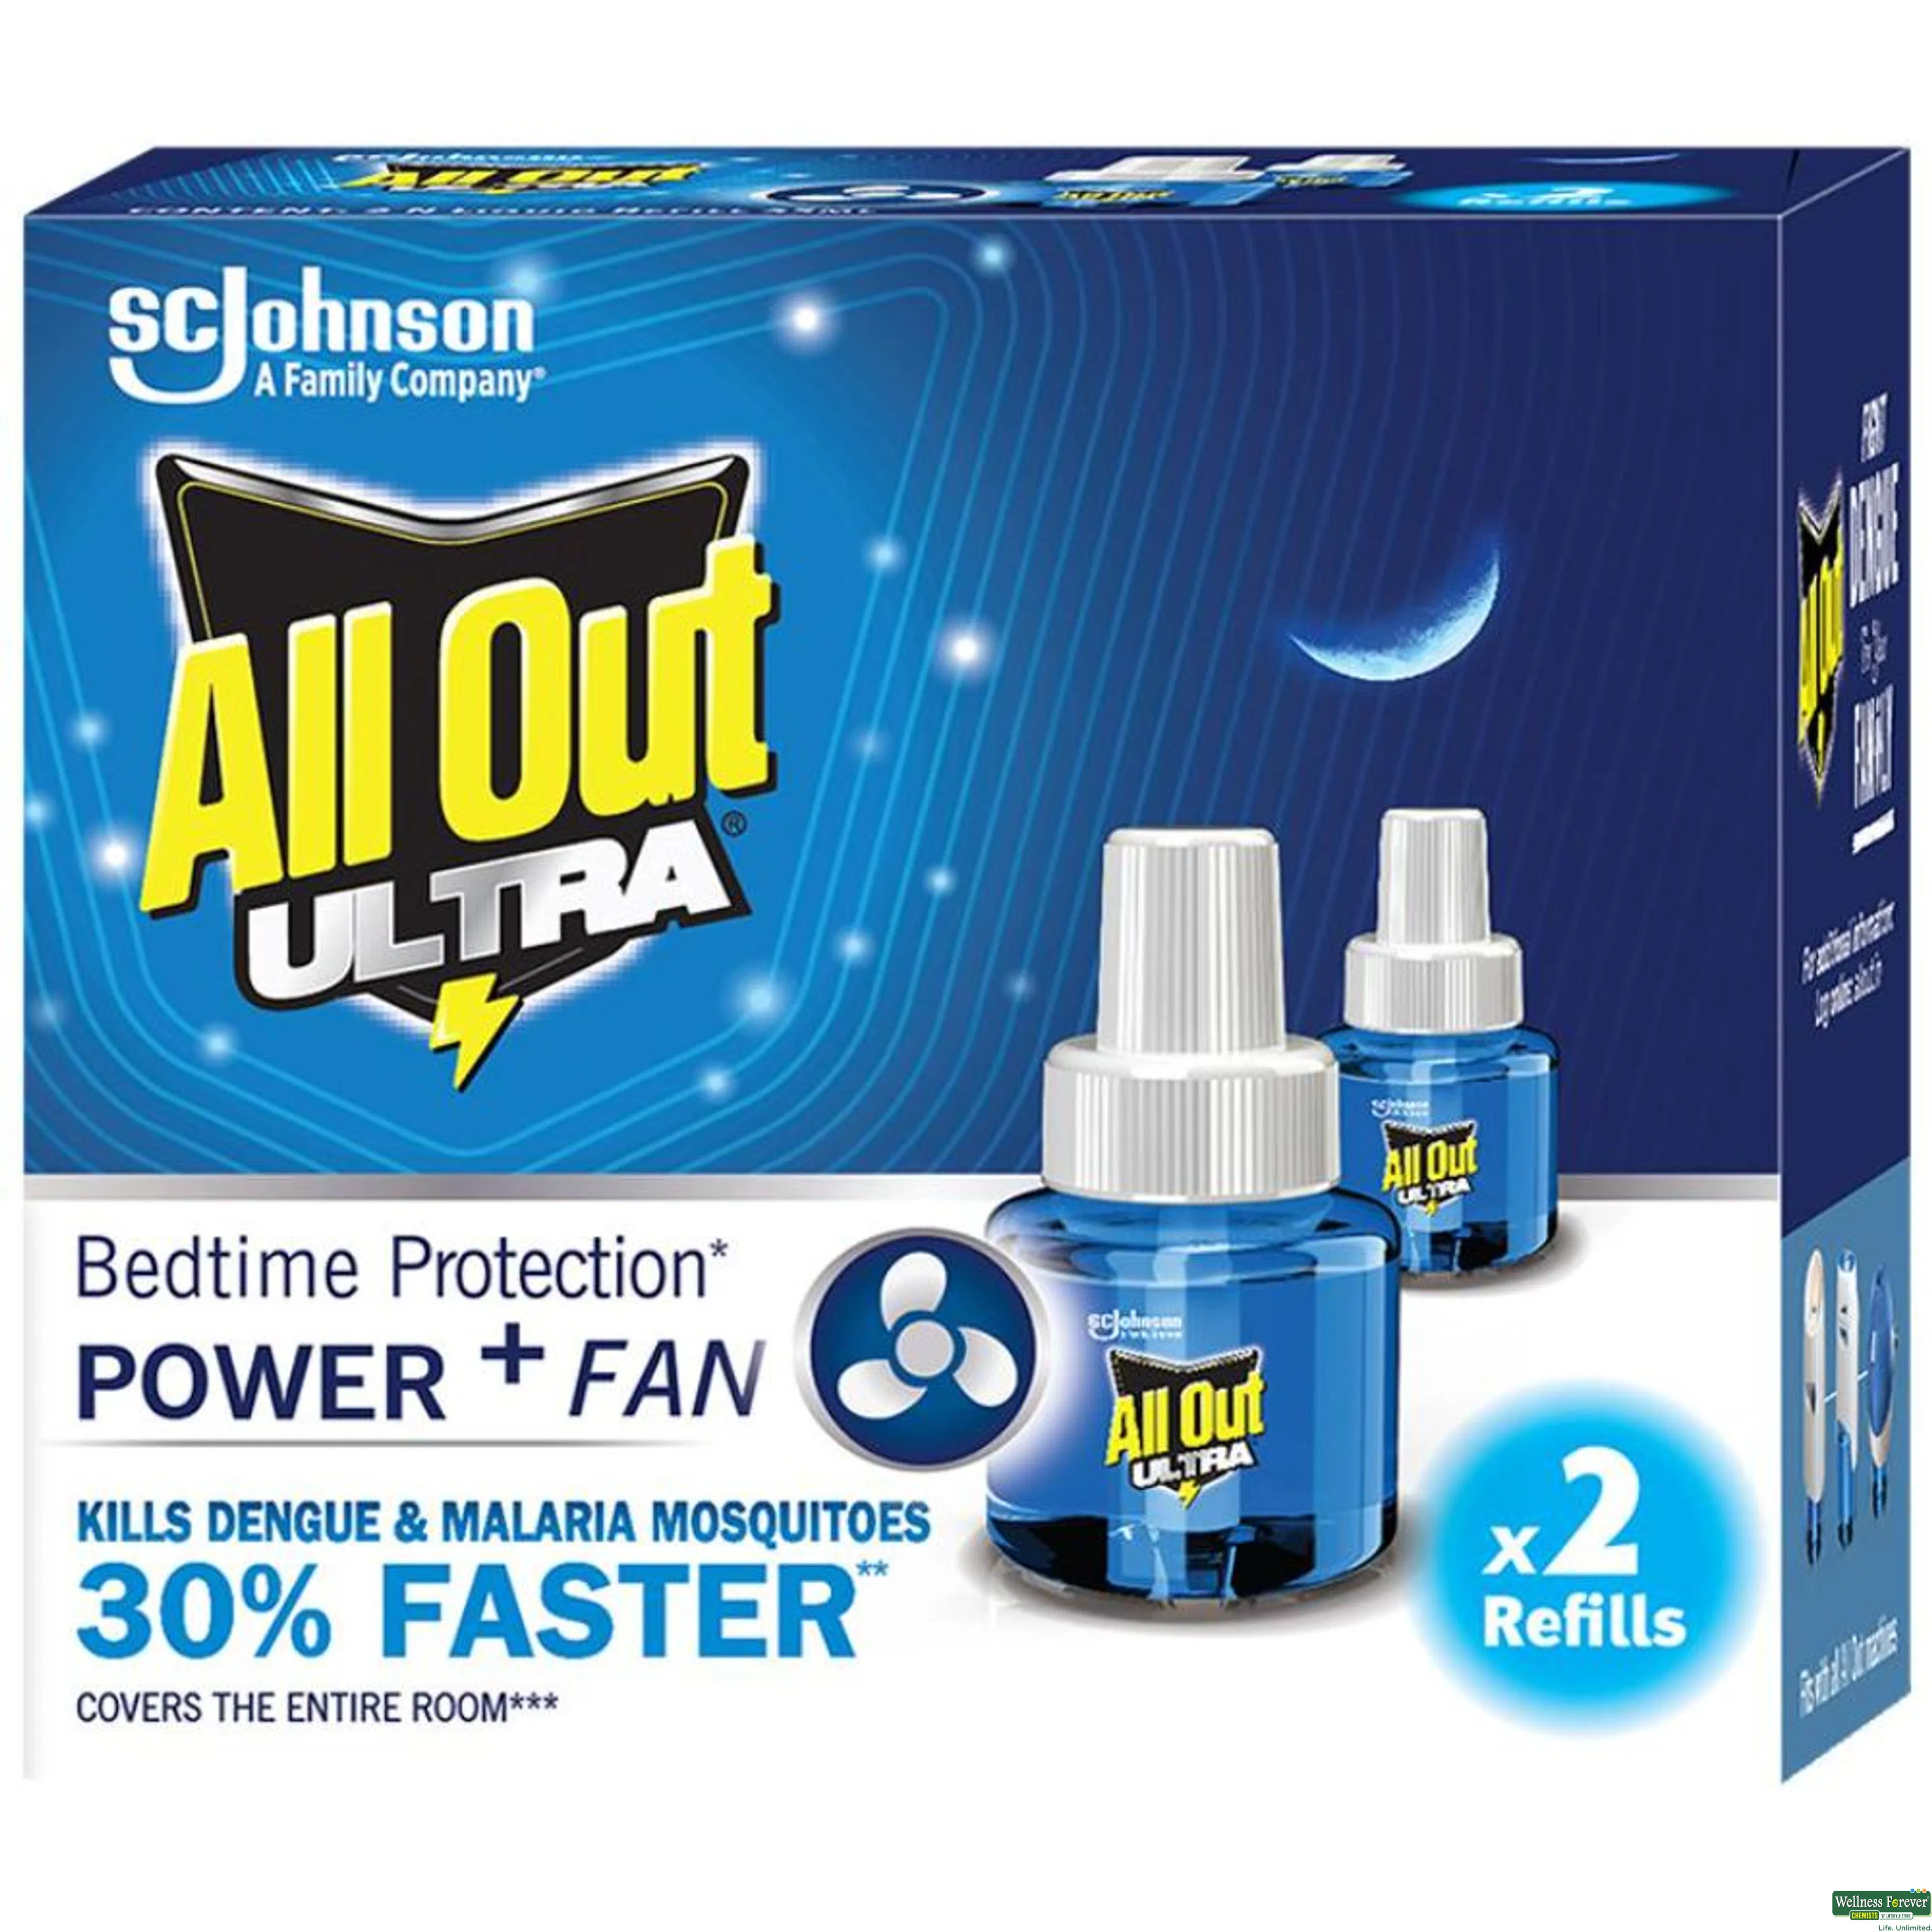 ALLOUT MOSQUITO ULTRA TWIN REF 5IN1 1PC-image